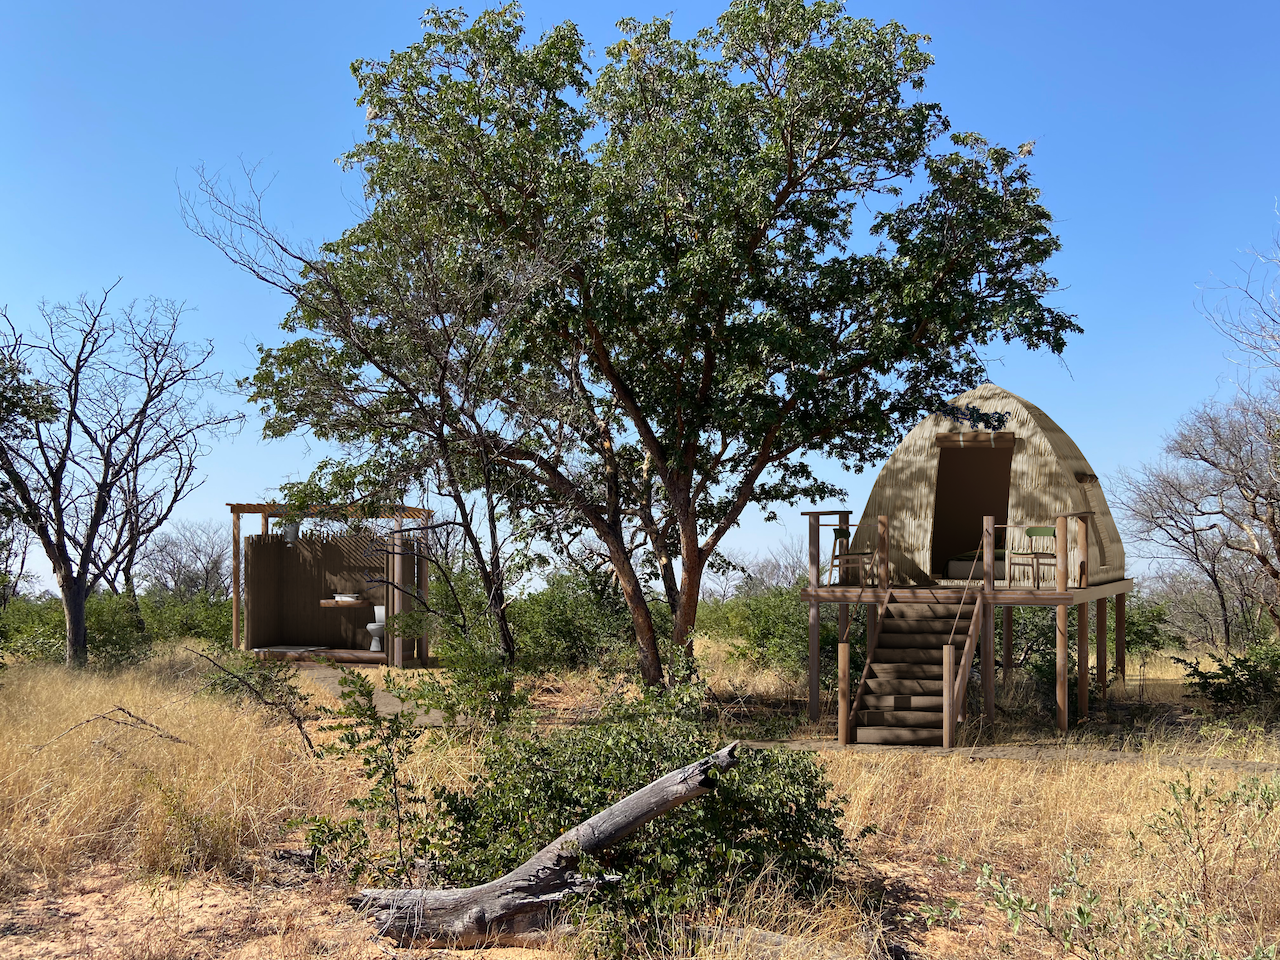 One of the world’s most unique and unusual safari experiences in Botswana just got even better with the reopening of Nxamaseri Island Lodge.